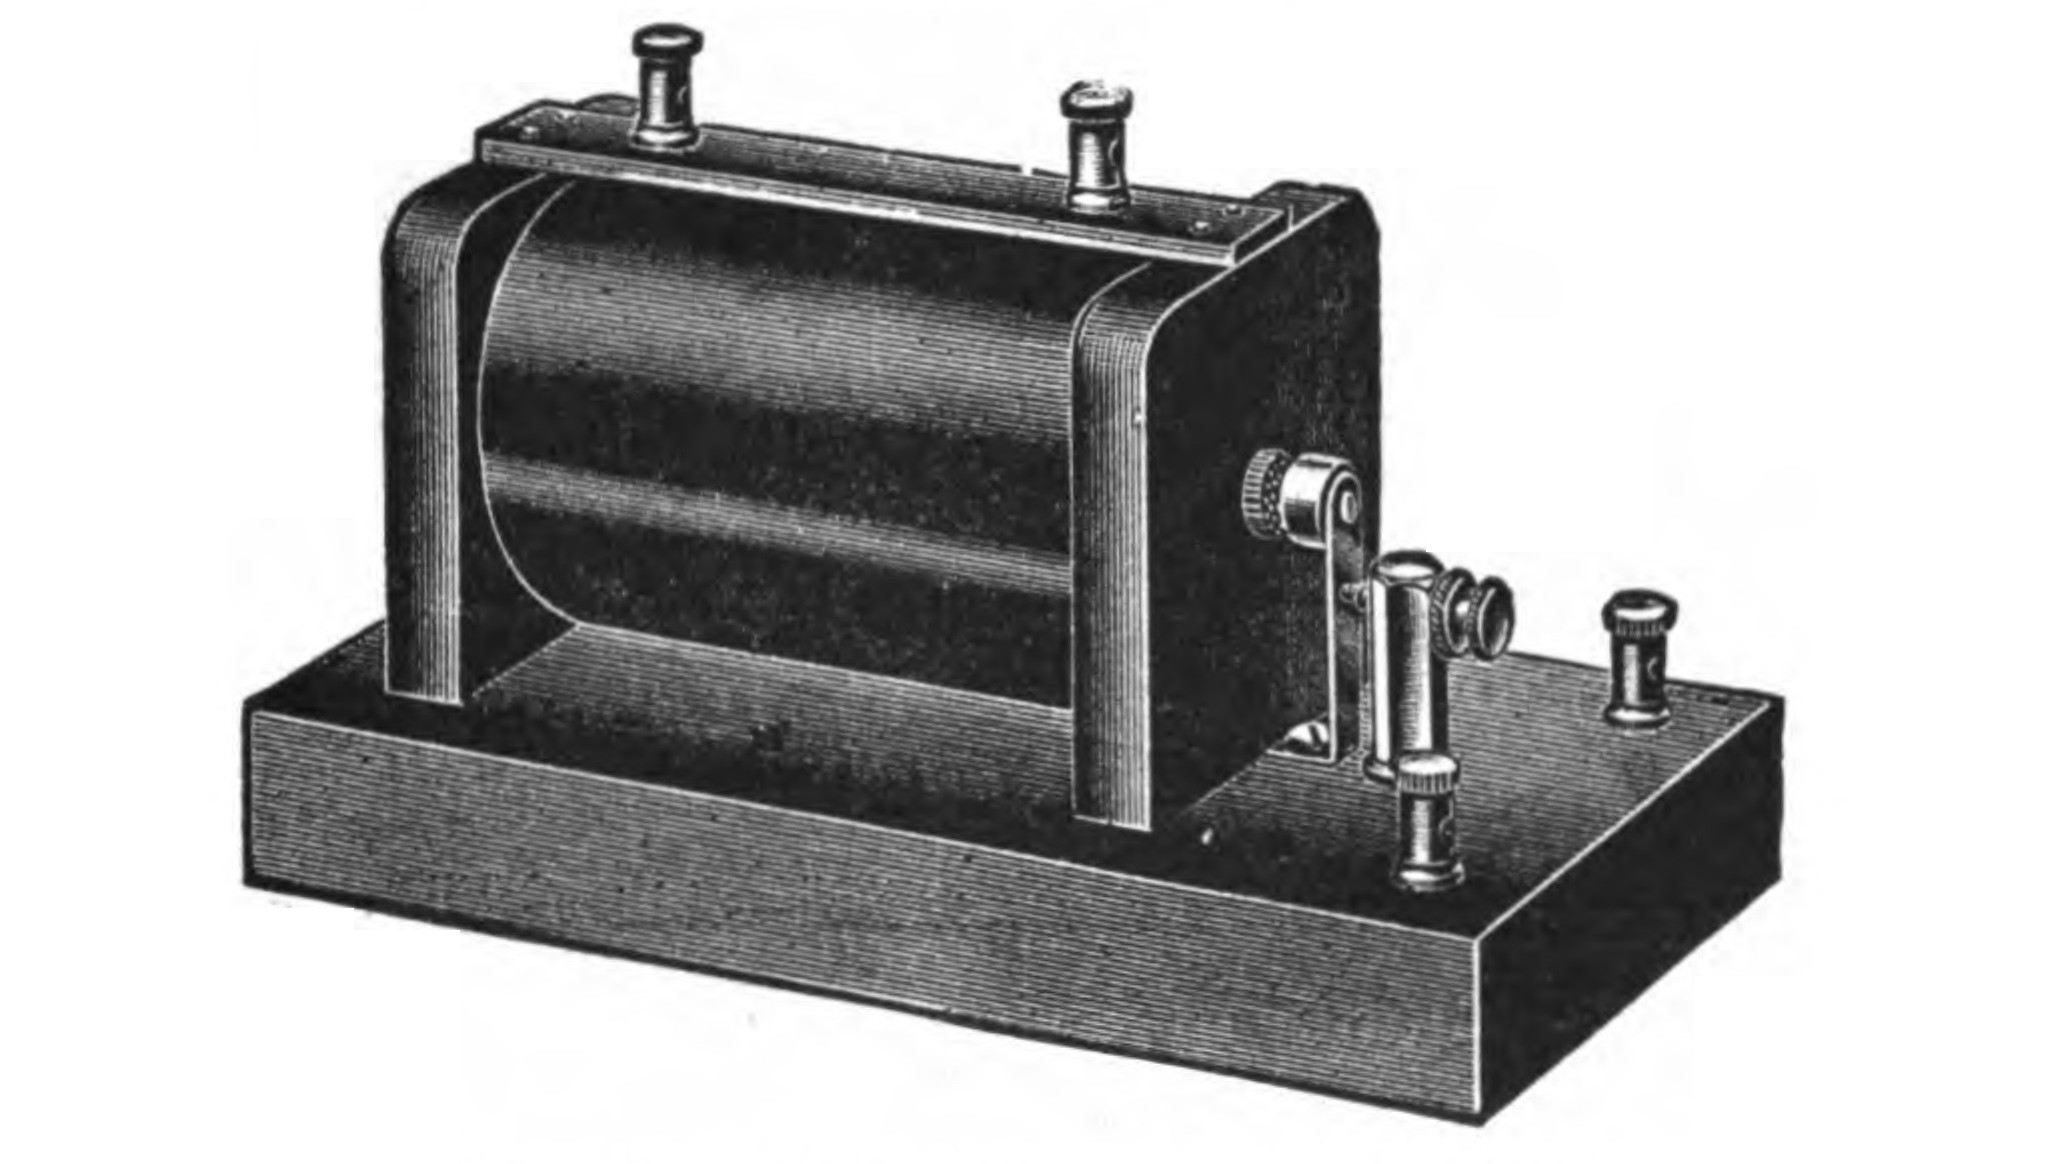 FIG. 109.—Induction or Spark Coil.